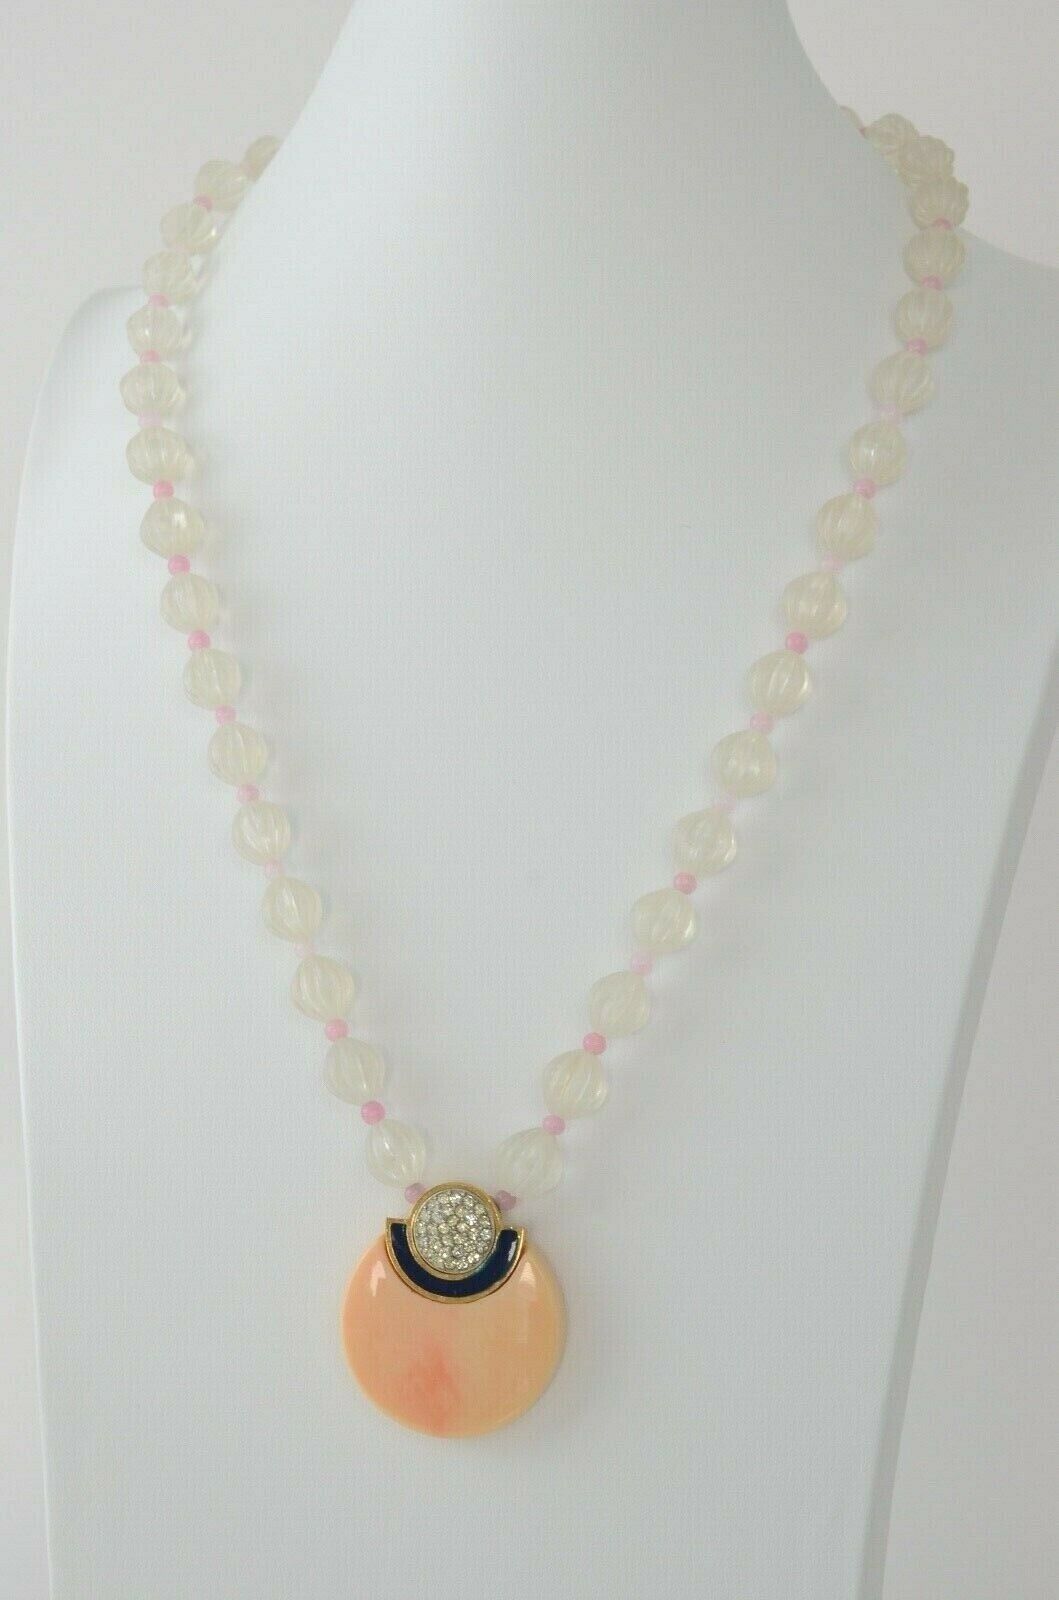 Givenchy Clear Beads Enamel Necklace Pink Beautiful Rhinestones